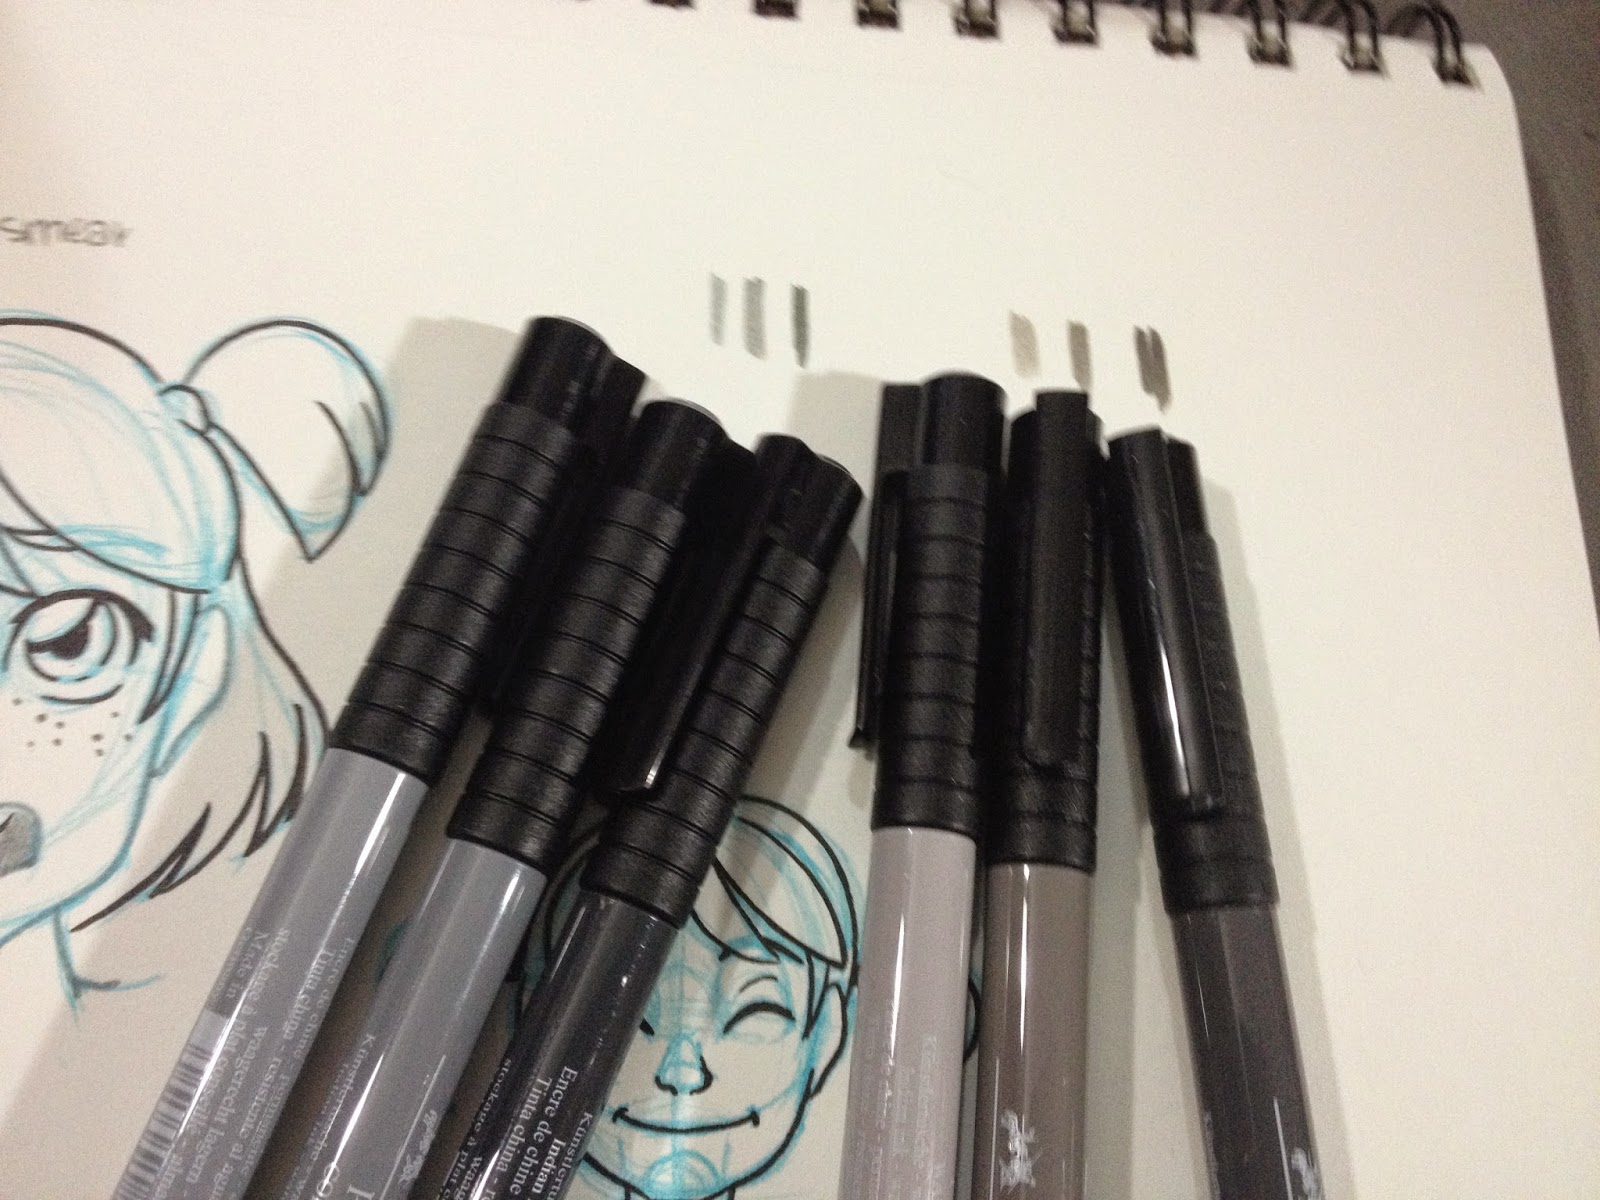 Art Supply Review: Six Shades of Grey